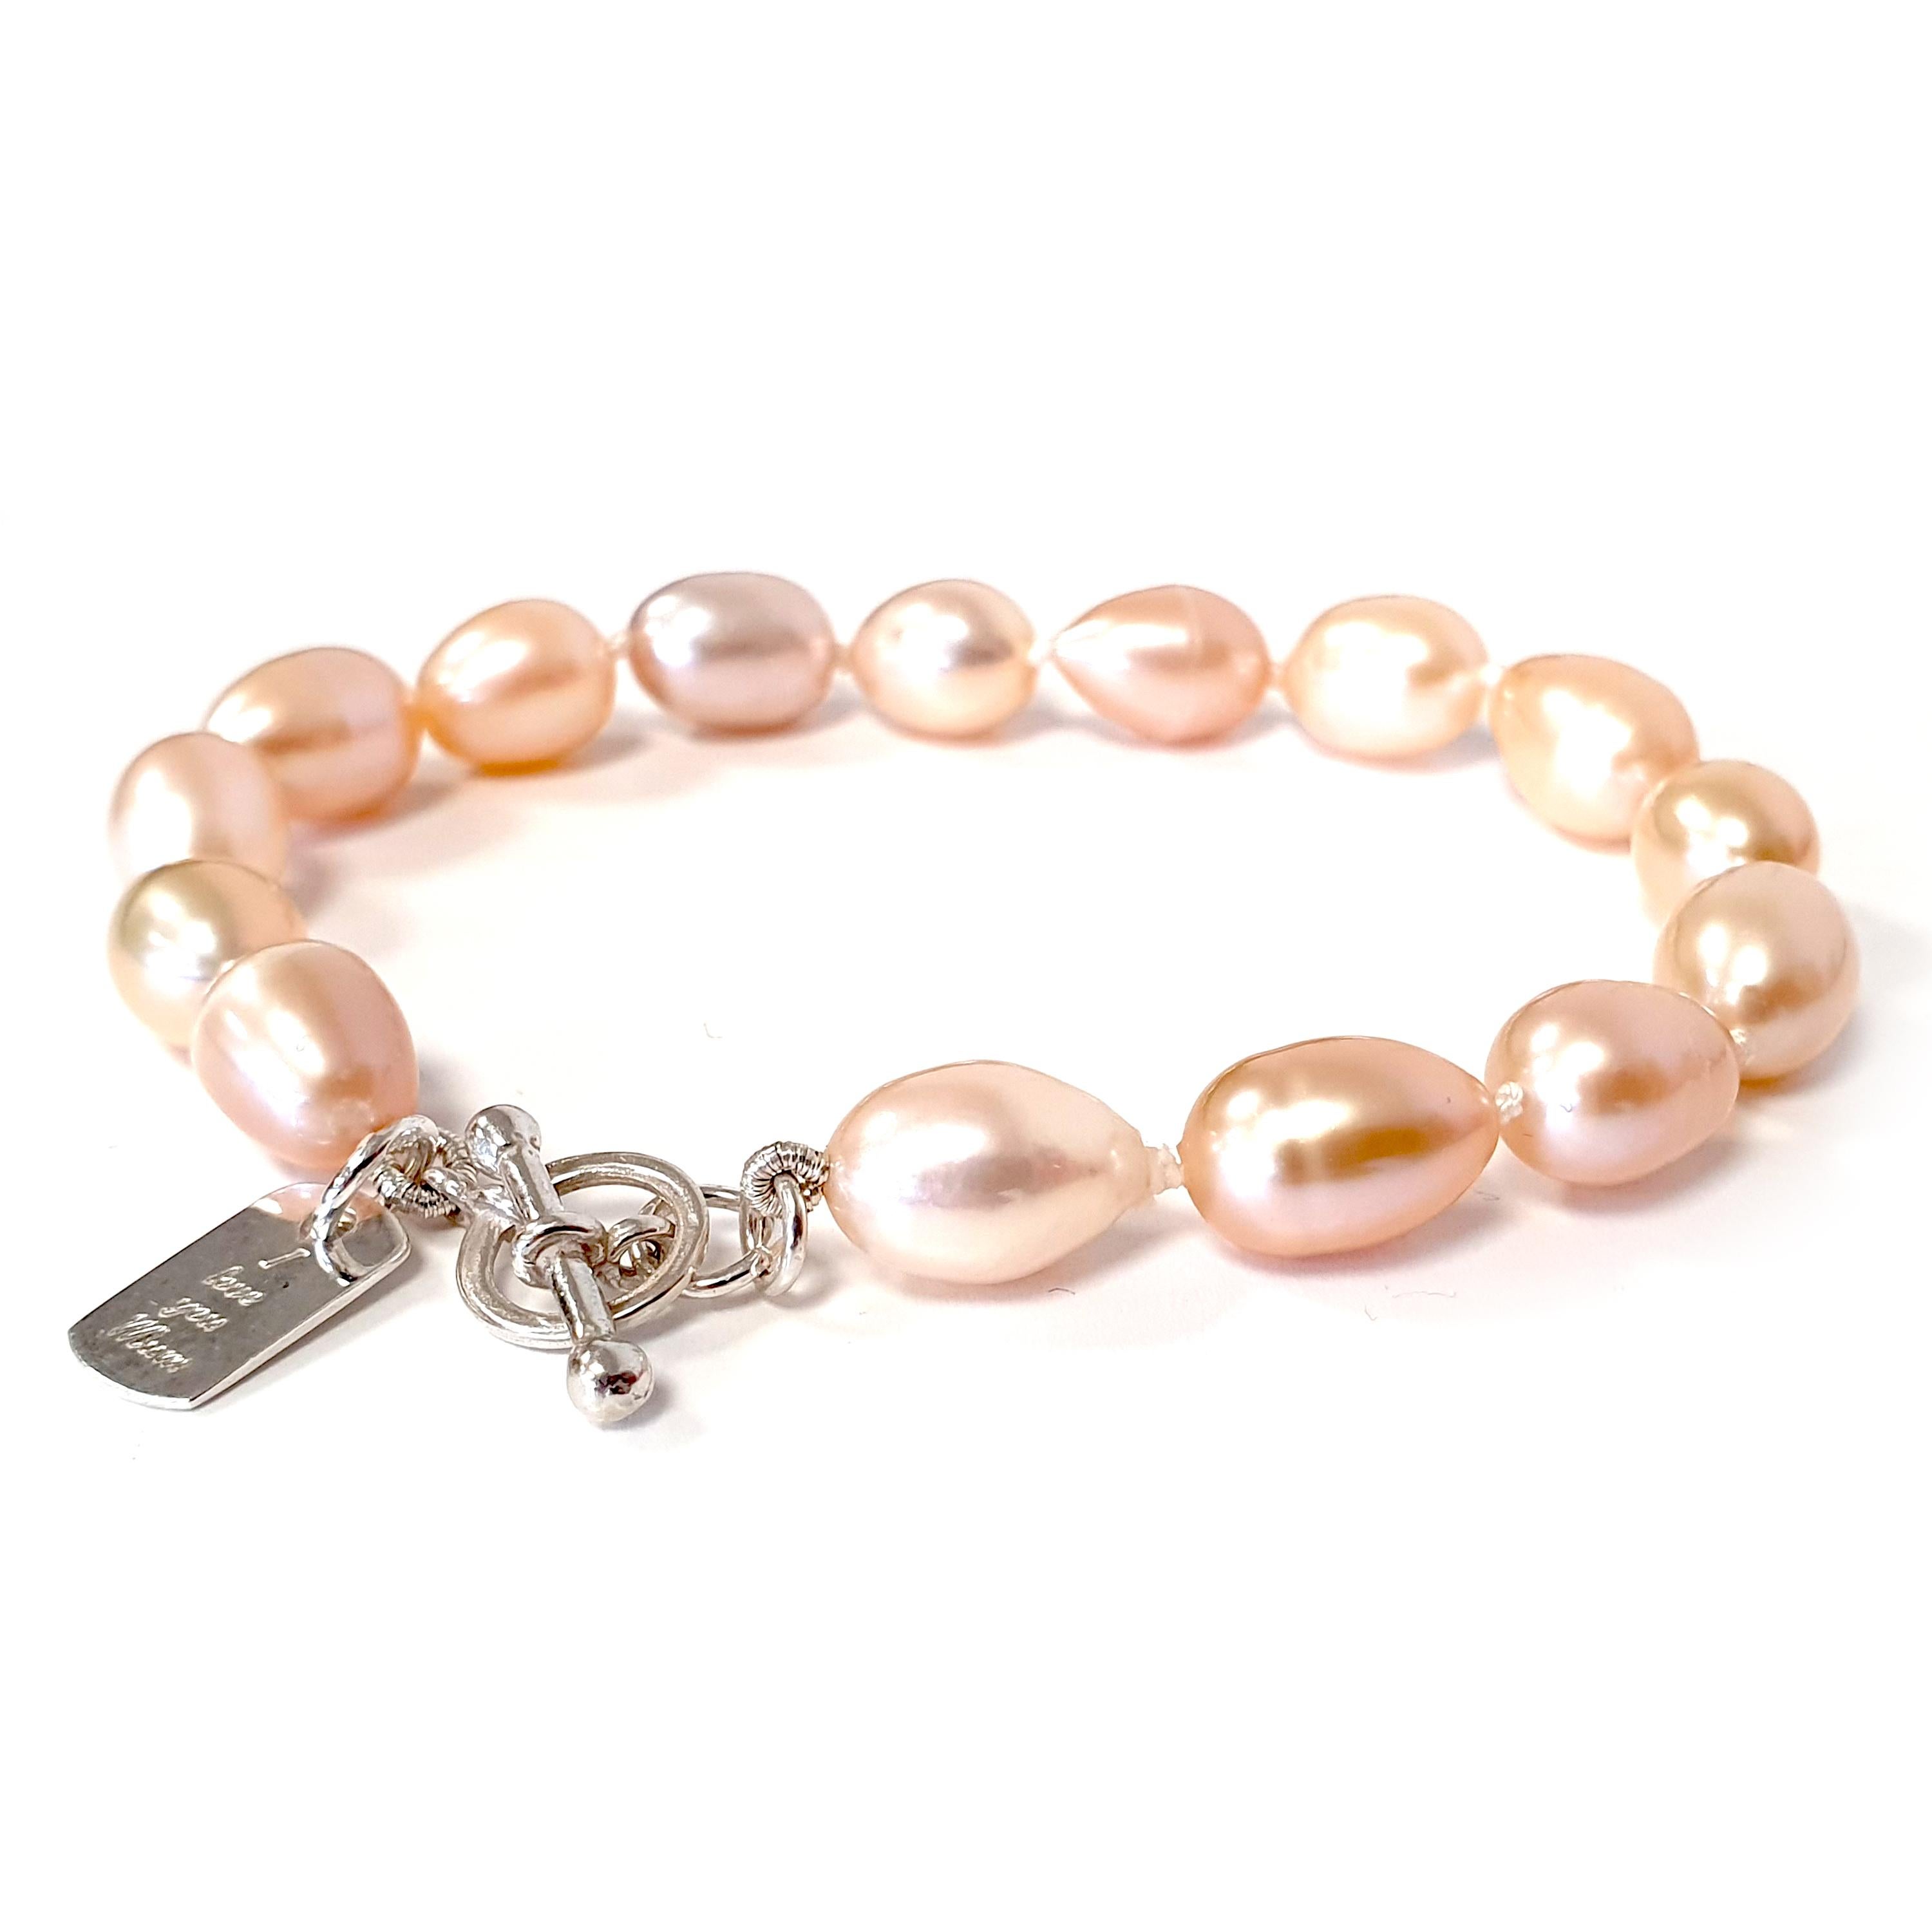 A single-strand knotted pearl bracelet perfect for everyday wear. A beautiful arrangement of pinky-peach freshwater pearls with a sterling silver T-bar clasp and a tag engraved with 